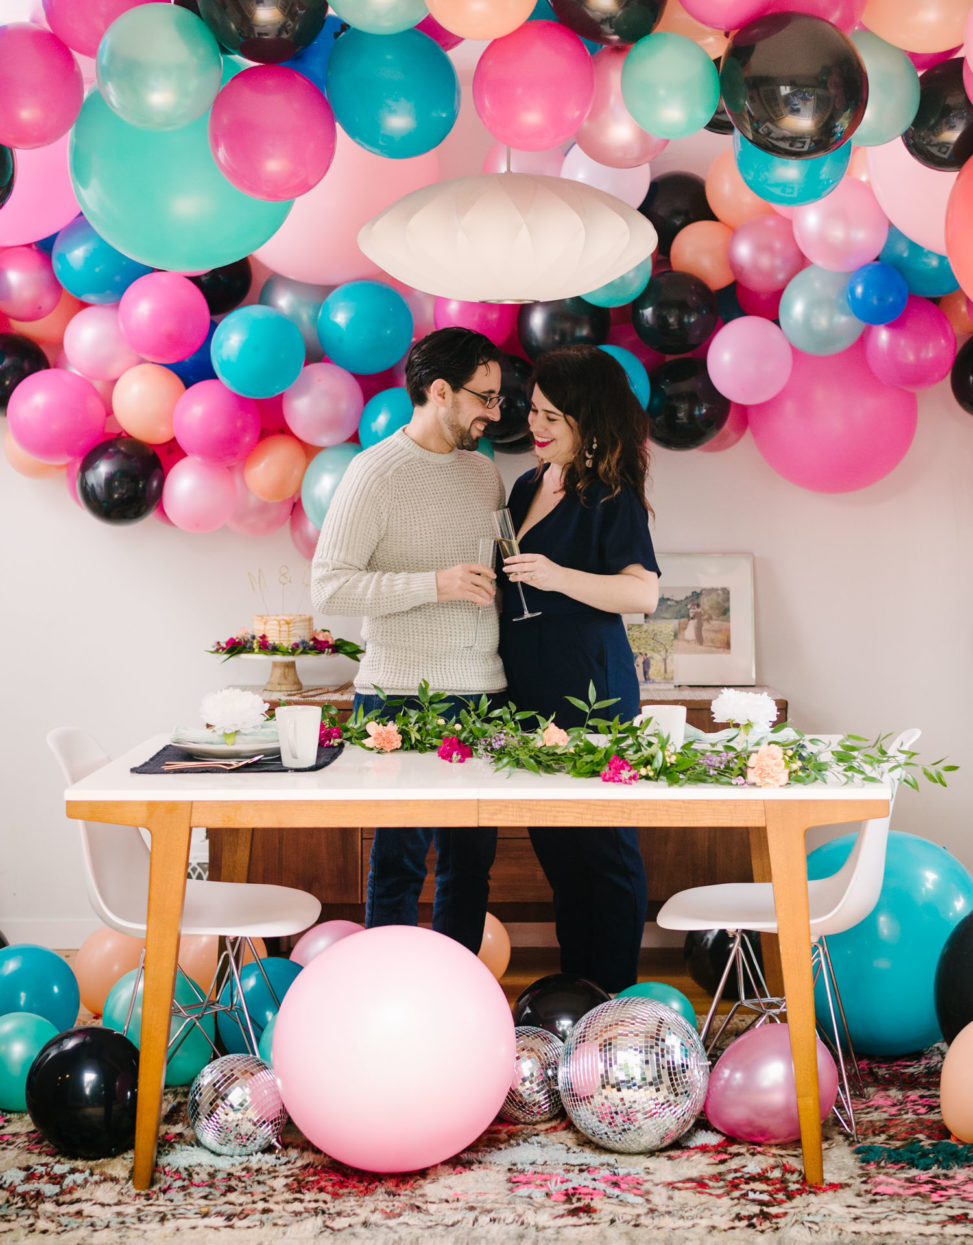 couple toasting with champagne flutes in a room filled with balloons and disco balls